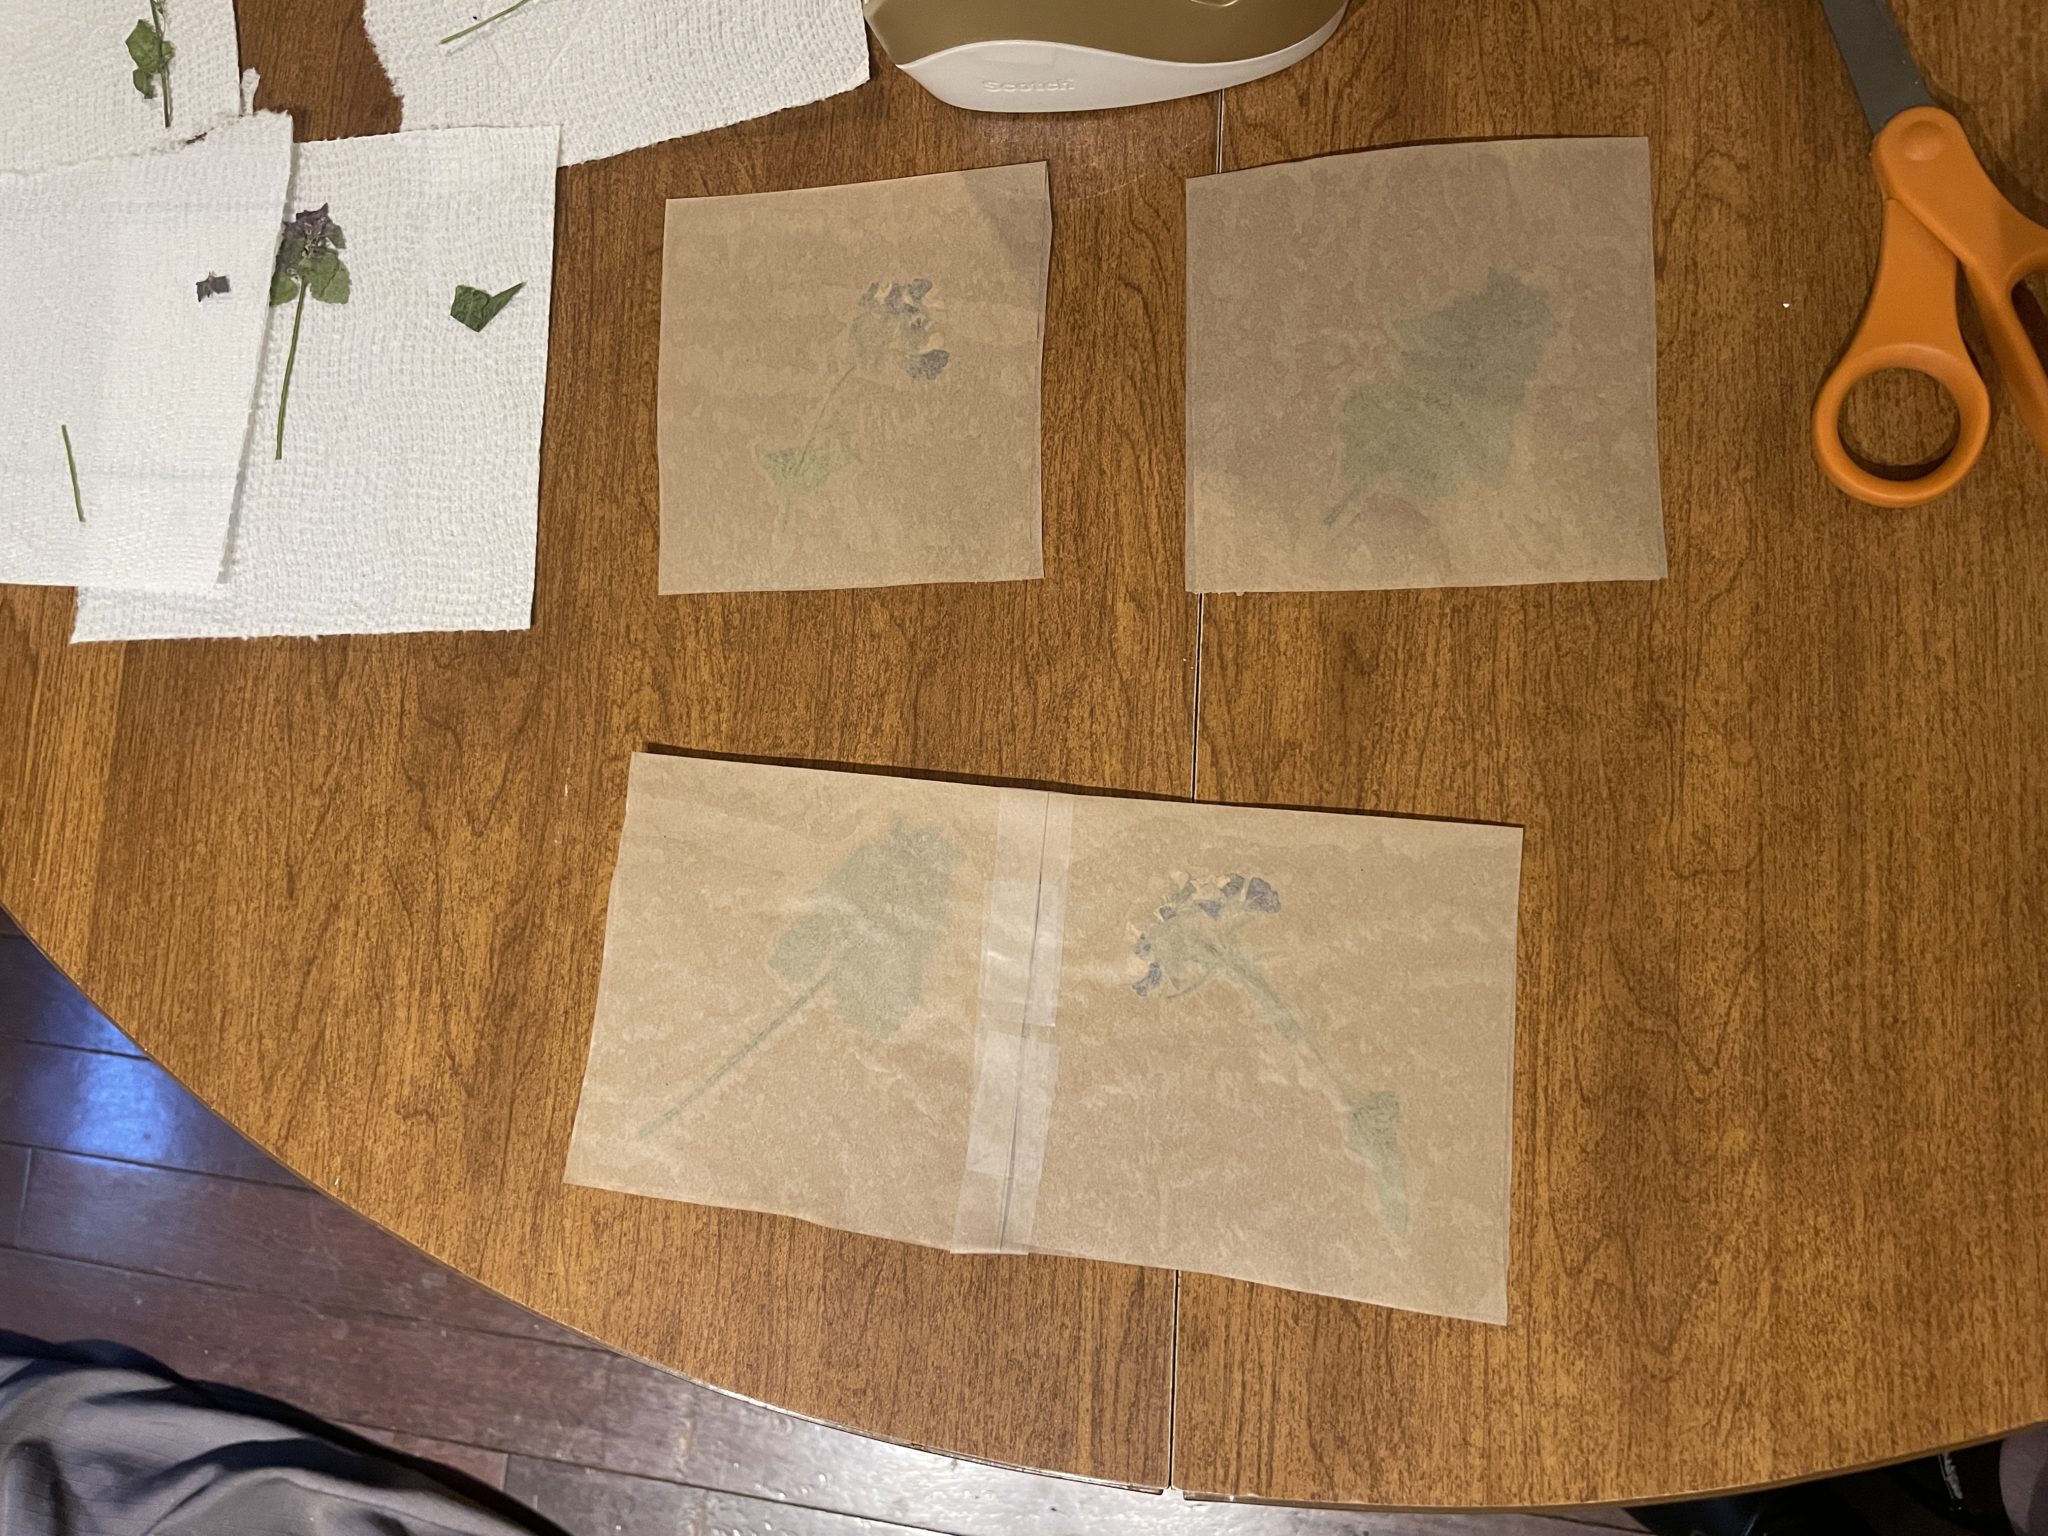 Photo of four squares of fused waxed paper laid out on a table. The bottom two pieces of waxed paper are taped together while the top two pieces are laid next to each other, about to be taped together.